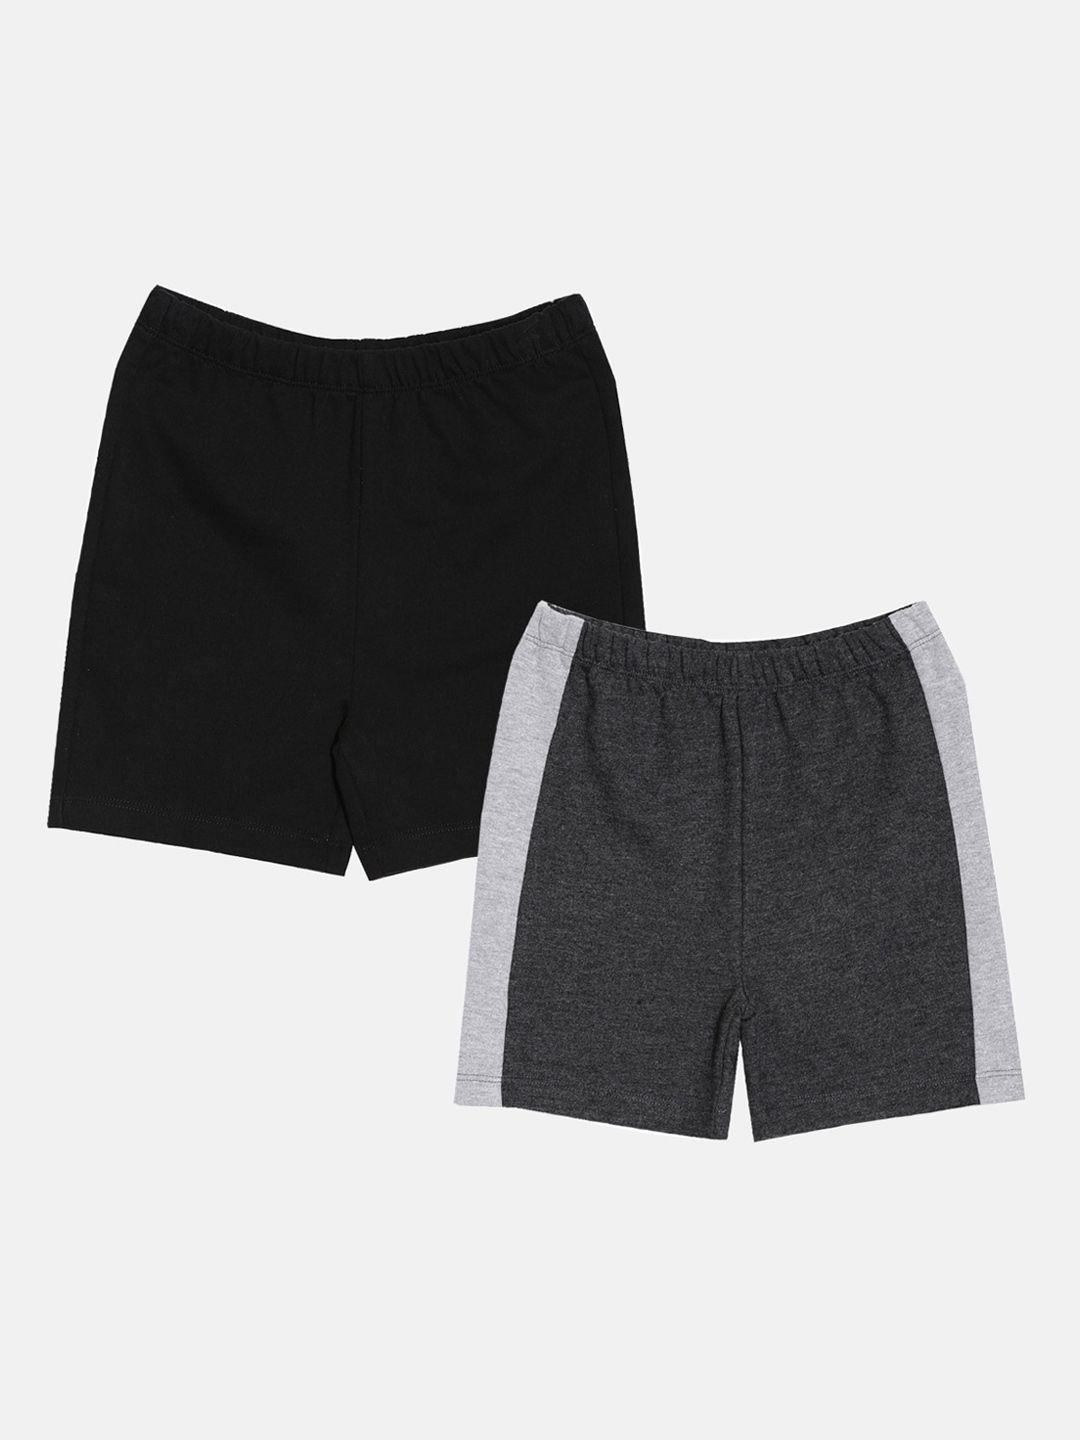 aomi-pack-of-2-boys-black-&-charcoal-solid-cotton-shorts